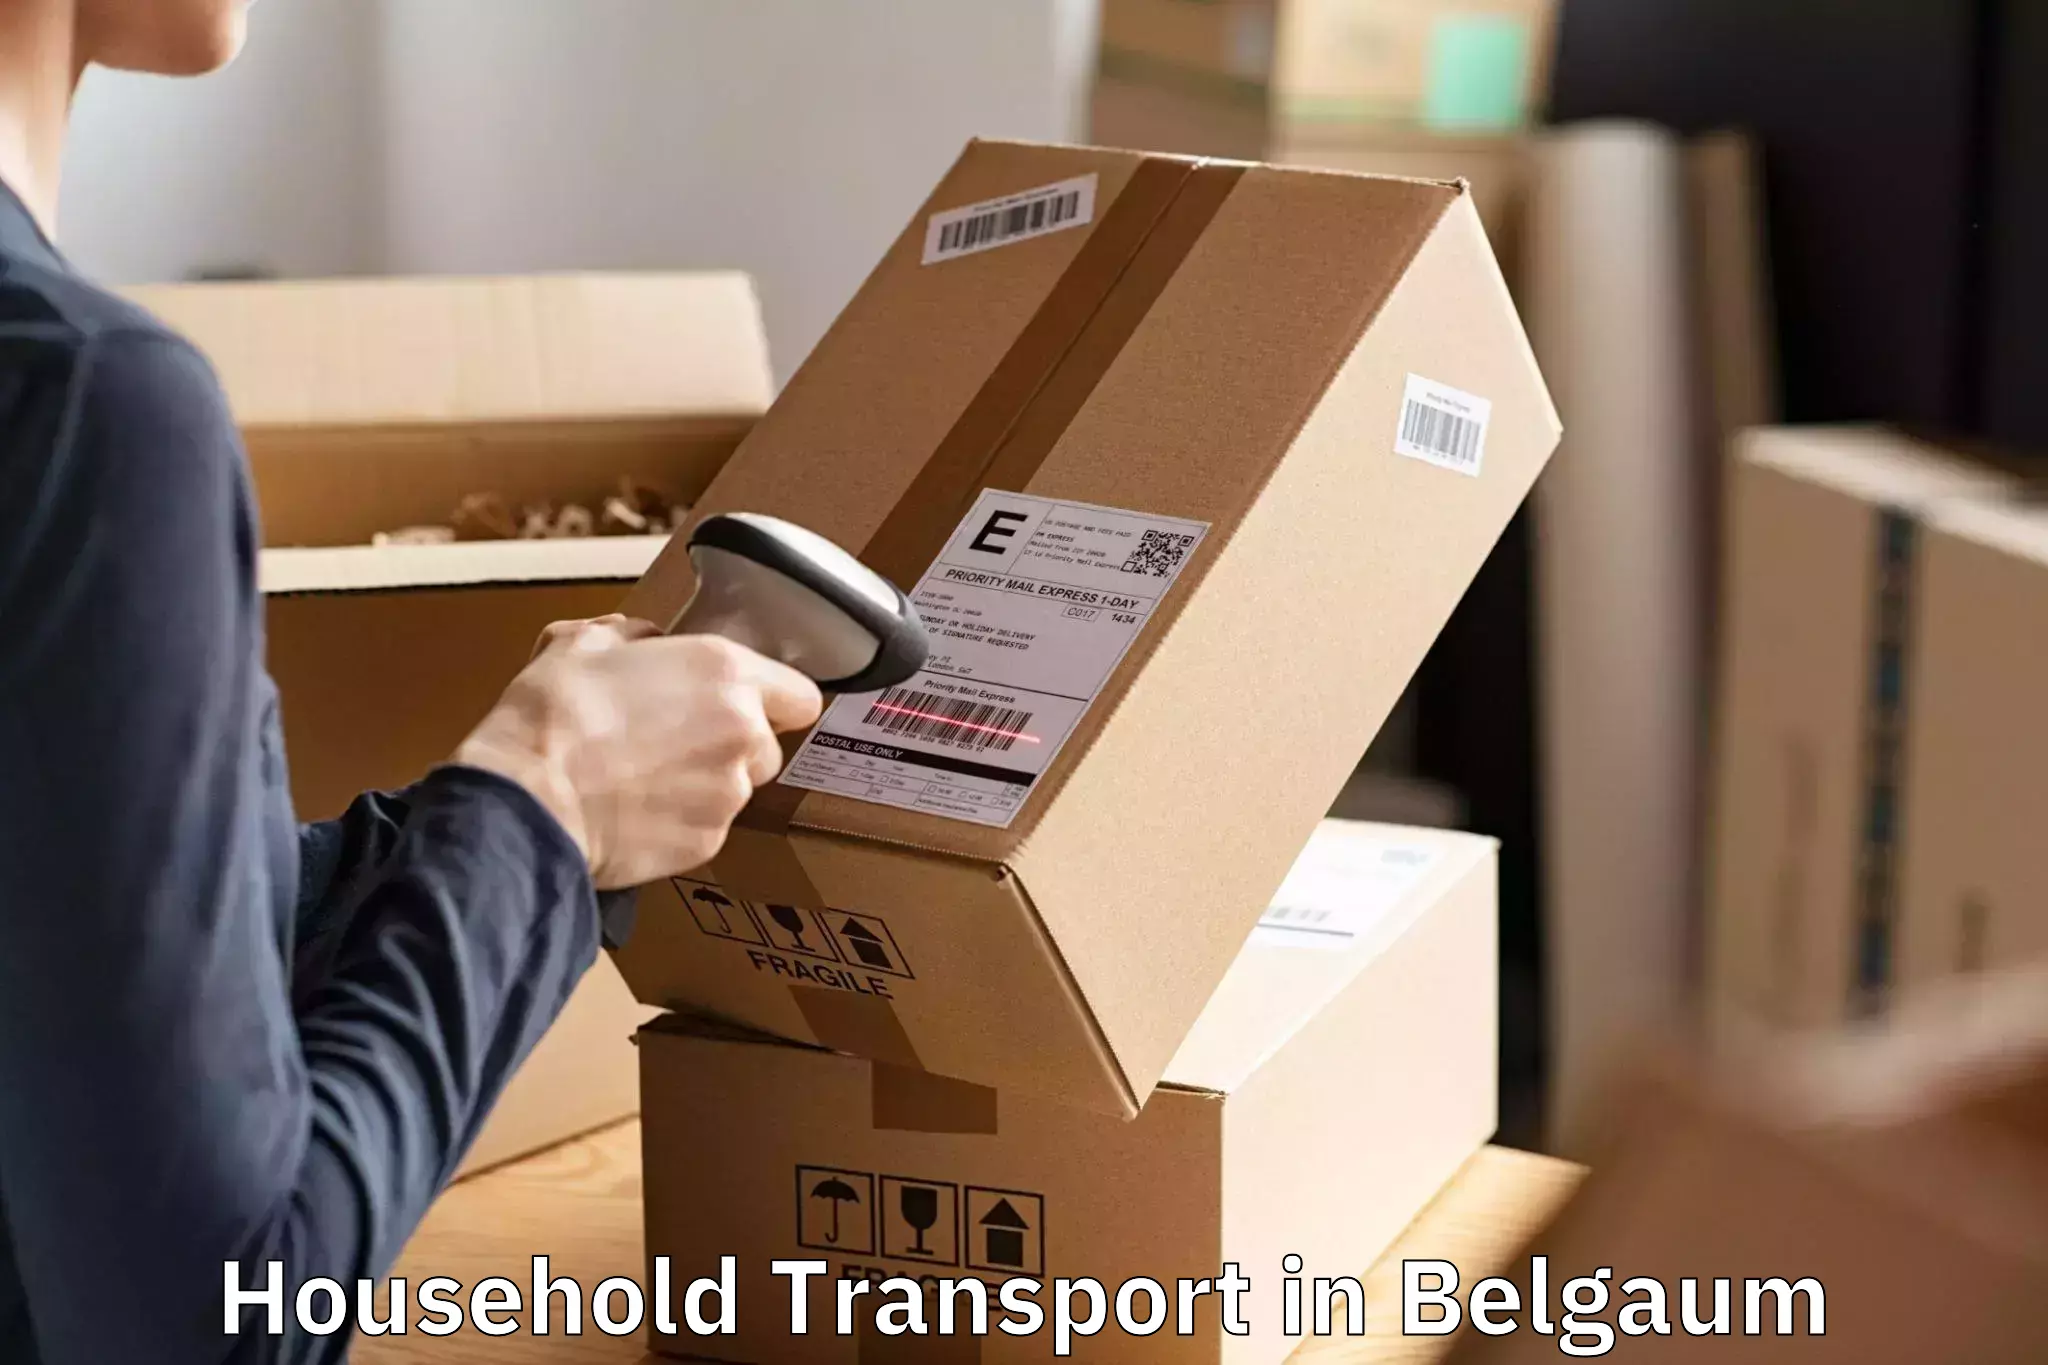 Expert Household Transport Throughout India